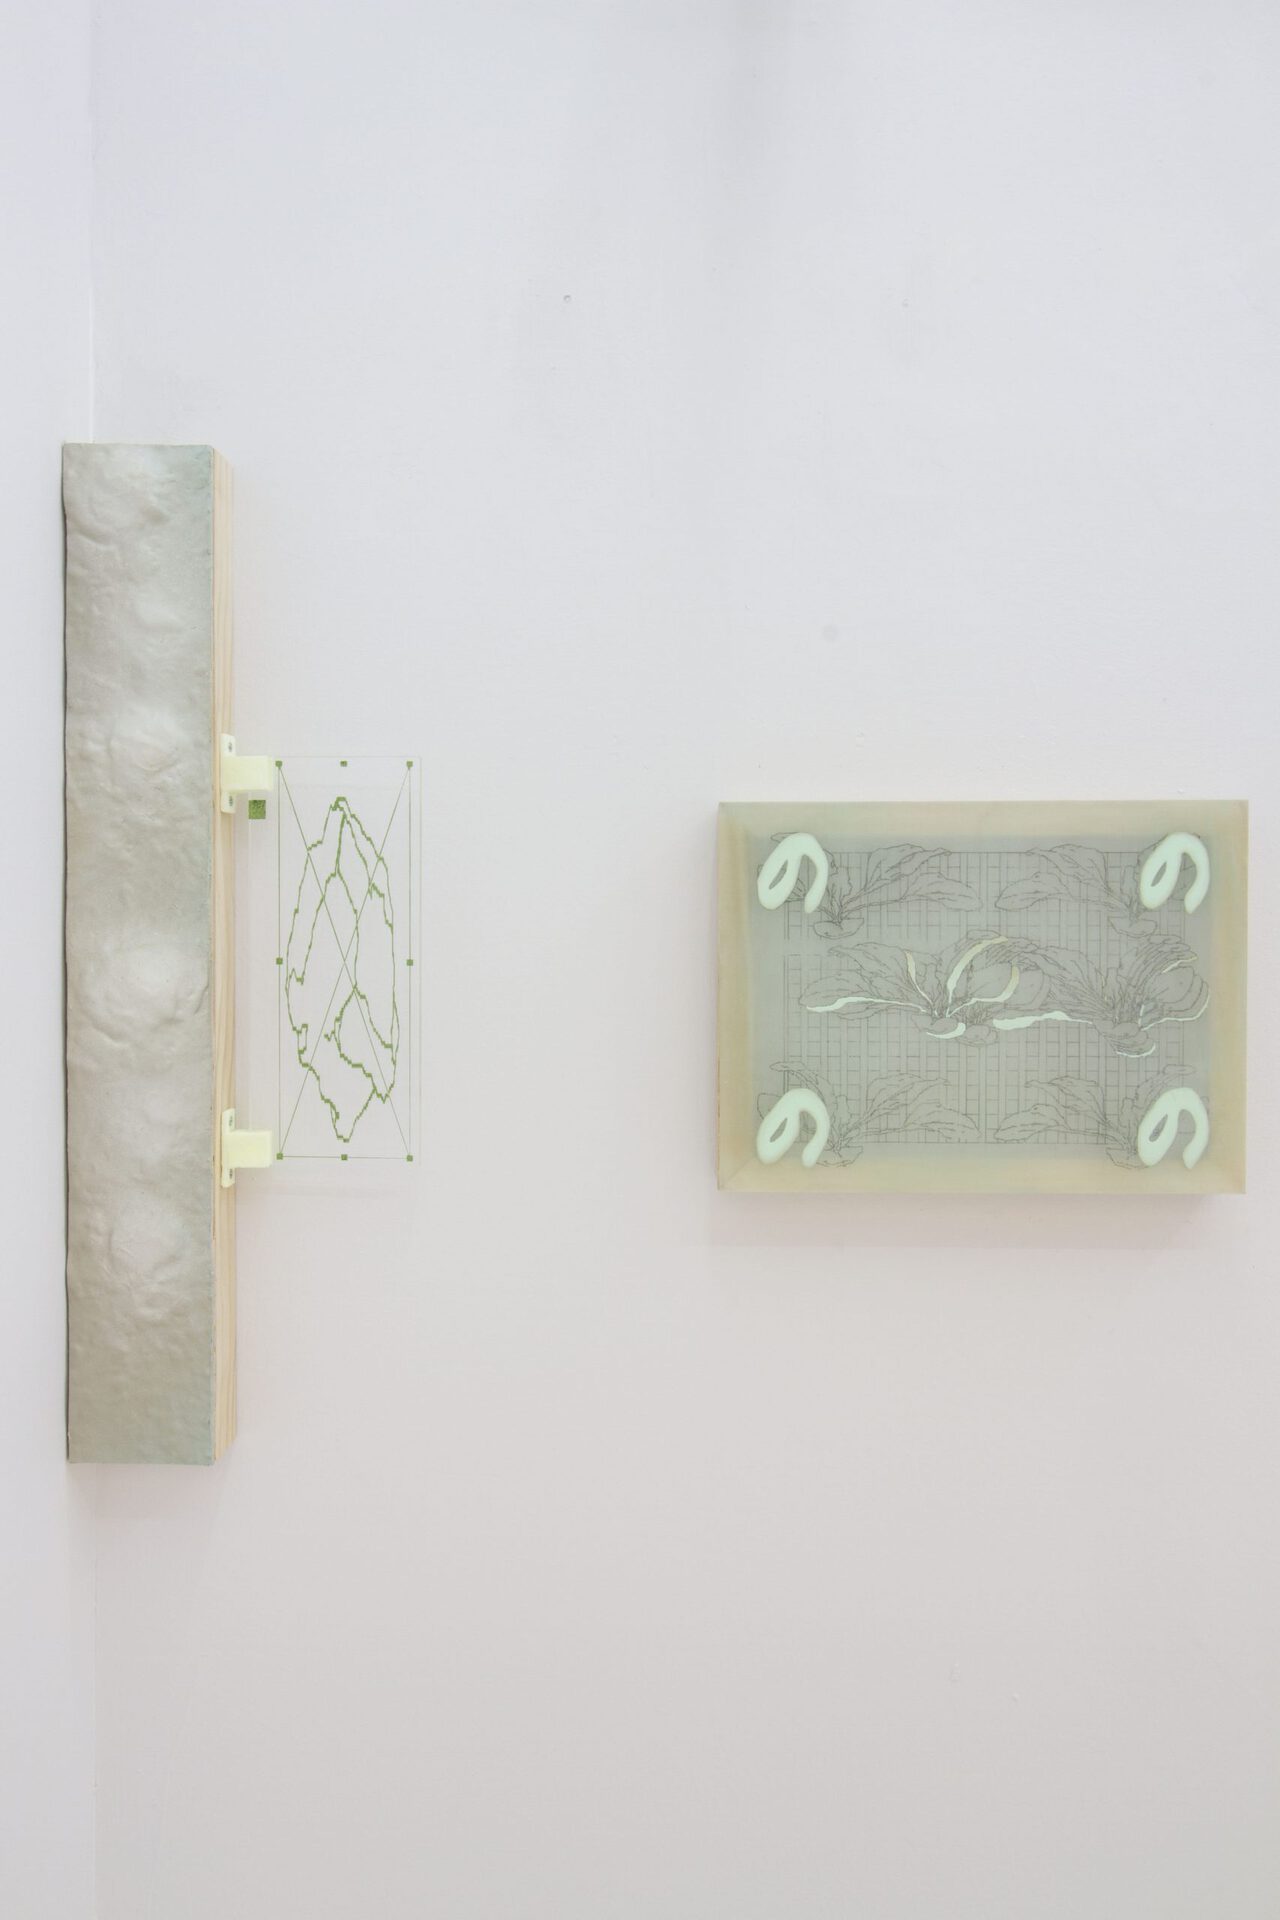 Naomi Nakazato  Left: A Soft Spot for a Rupture. Acrylic, polyurethane, screenprint on plexiglass thermoplastic mounted on panel. 23.5 x 8 x 2 inches. 2020  Right: Spoil  Acrylic and graphite on mounted plexiglass. 12 x 9 x 1.5 inches. 2020